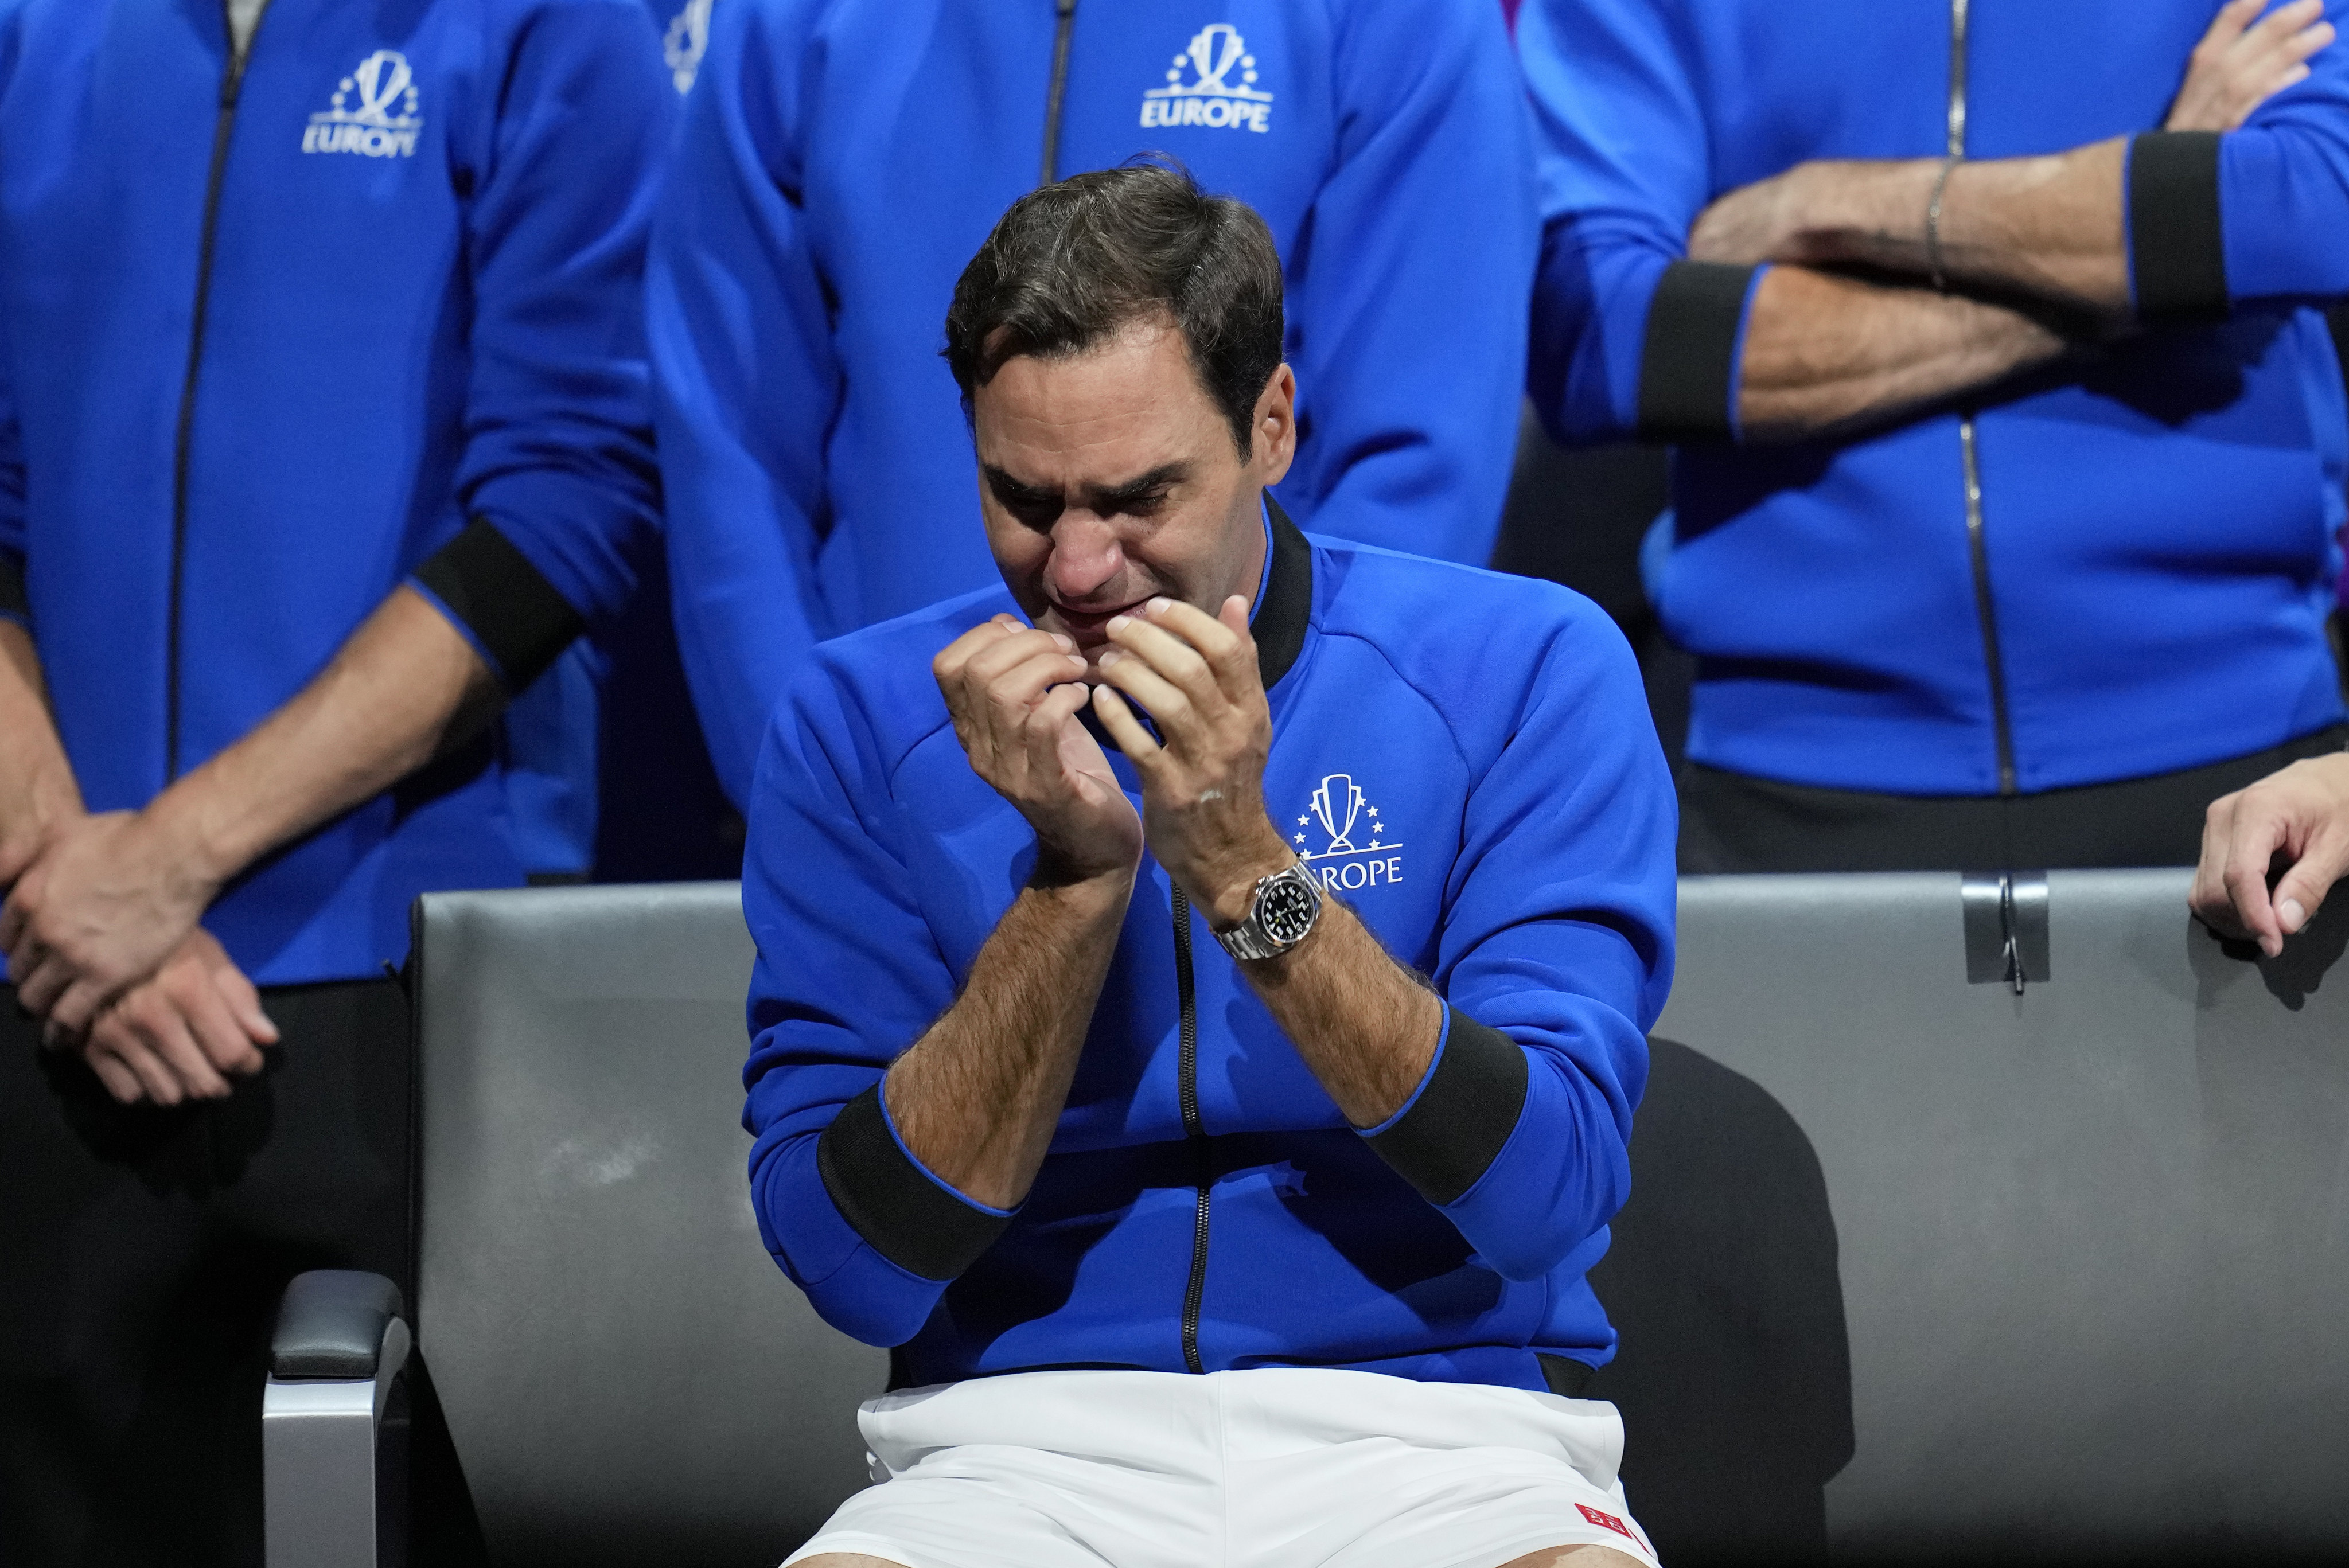 An emotional Roger Federer of Team Europe sits alongside his playing partner Rafael Nadal after their Laver Cup doubles match against Team World’s Jack Sock and Frances Tiafoe at the O2 arena in London. Photo: AP